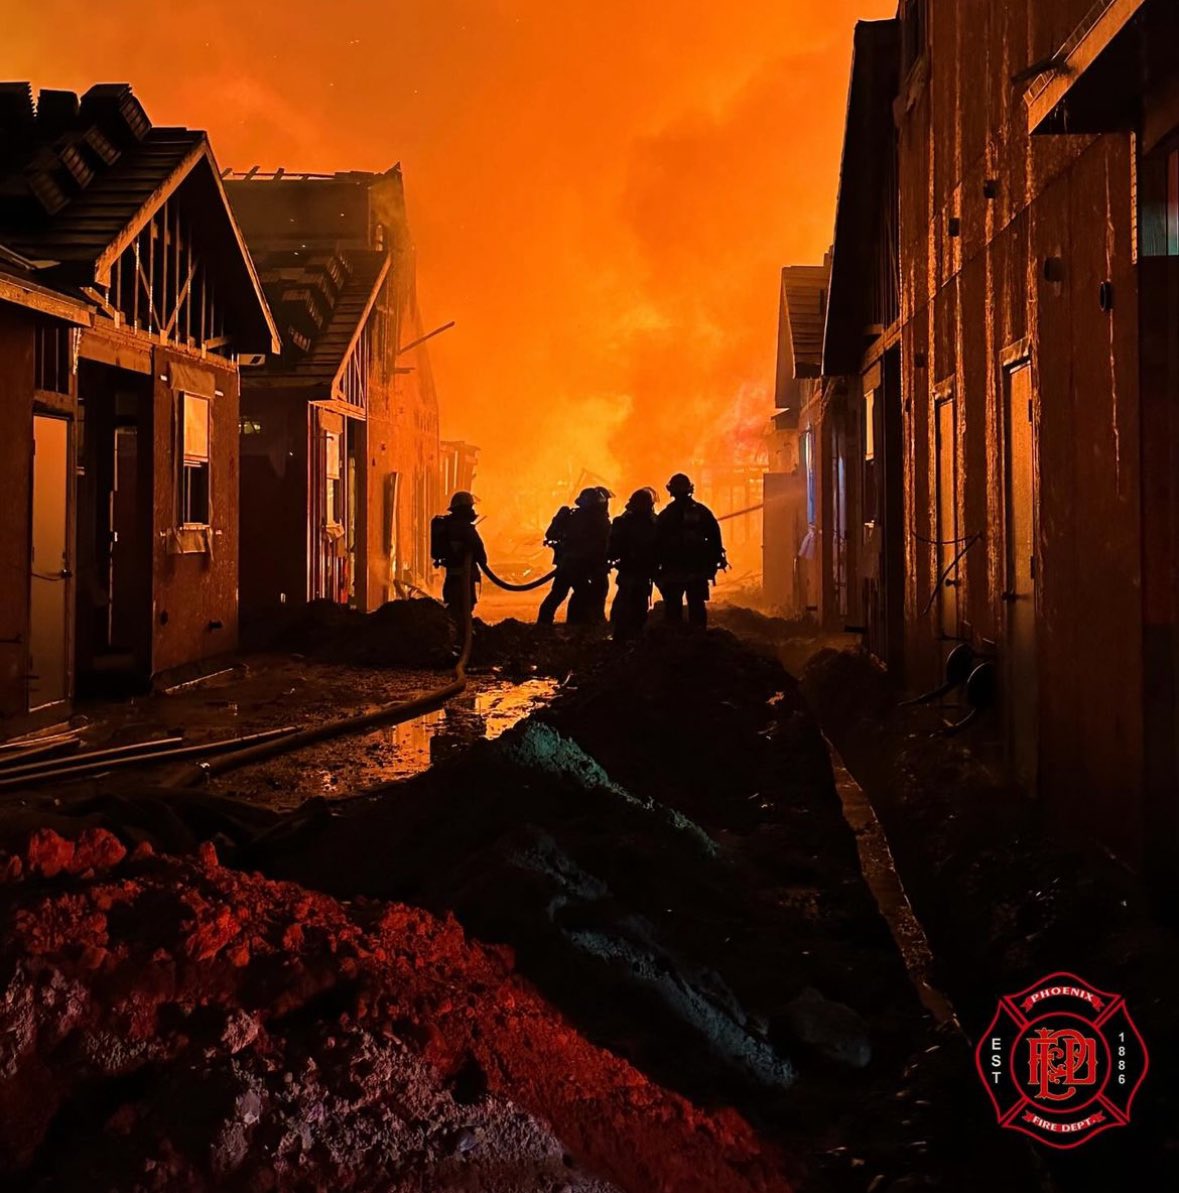 Phoenix Firefighters used several crews to extinguish the massive flames to several homes under construction in this New Housing Development in south Phoenix. 

If you’re the Developer, what would you do when you received the call? 

#Firefighters #housingmarket